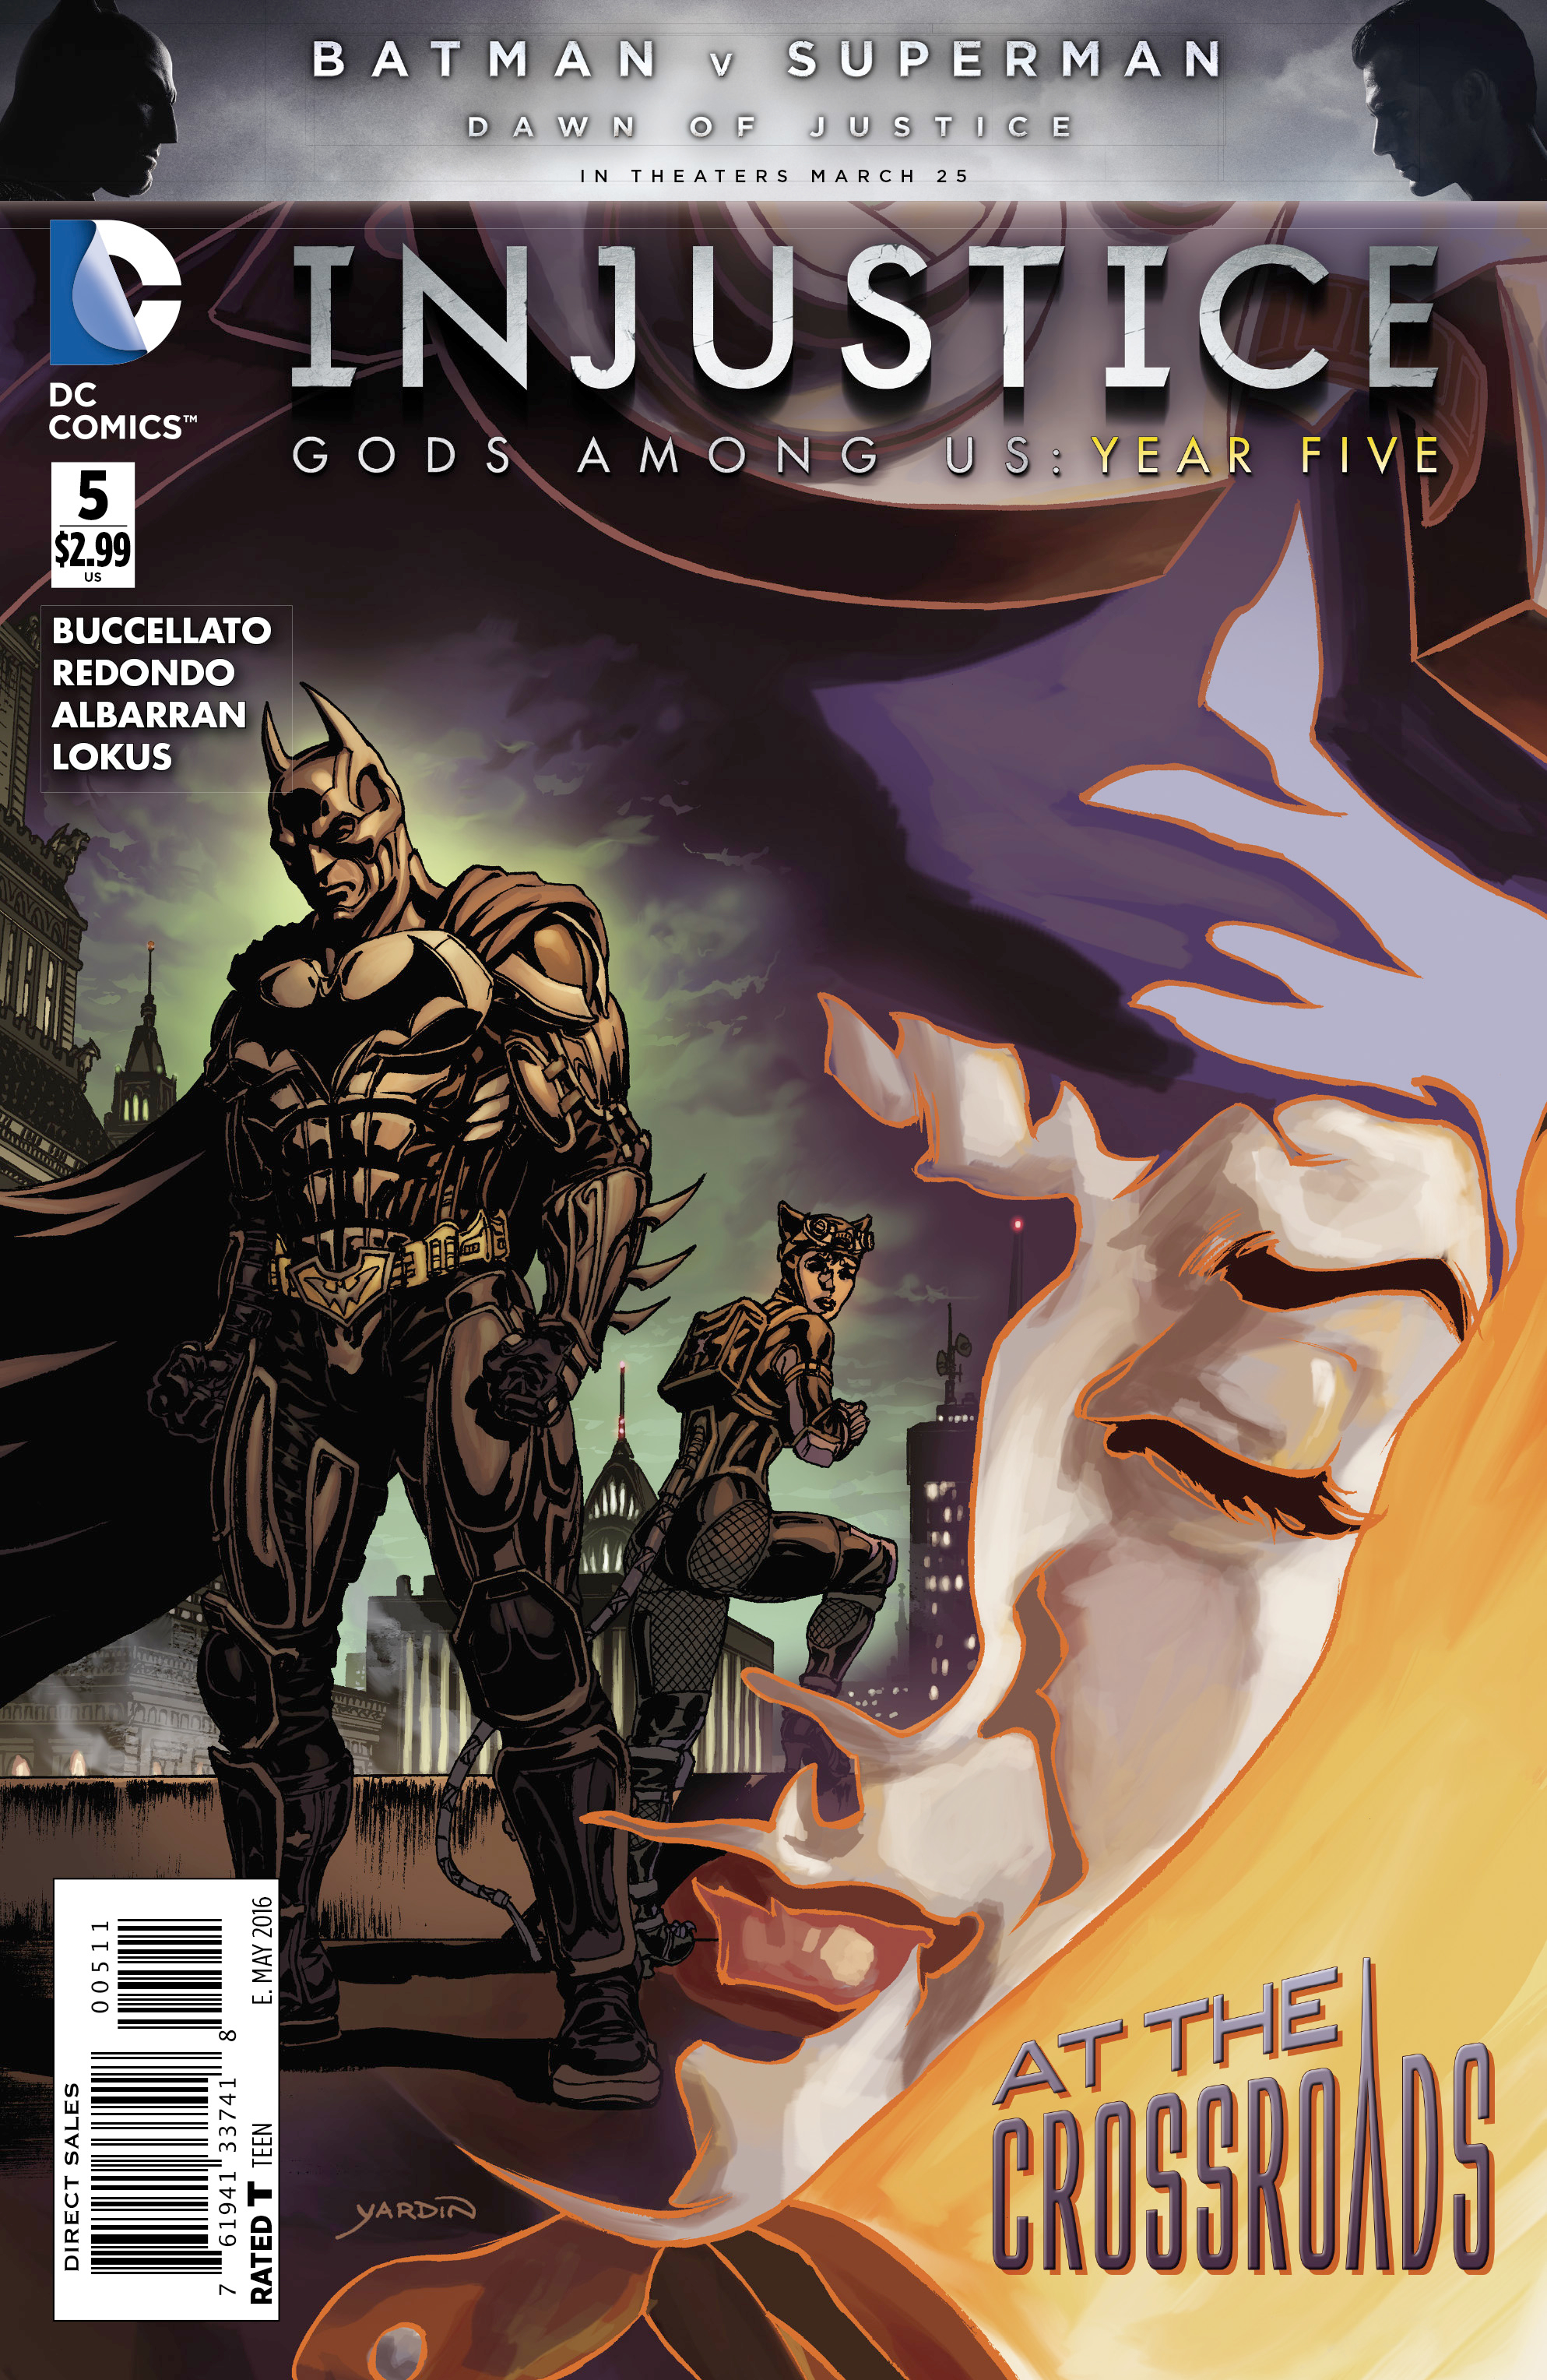 INJUSTICE GODS AMONG US YEAR FIVE #5